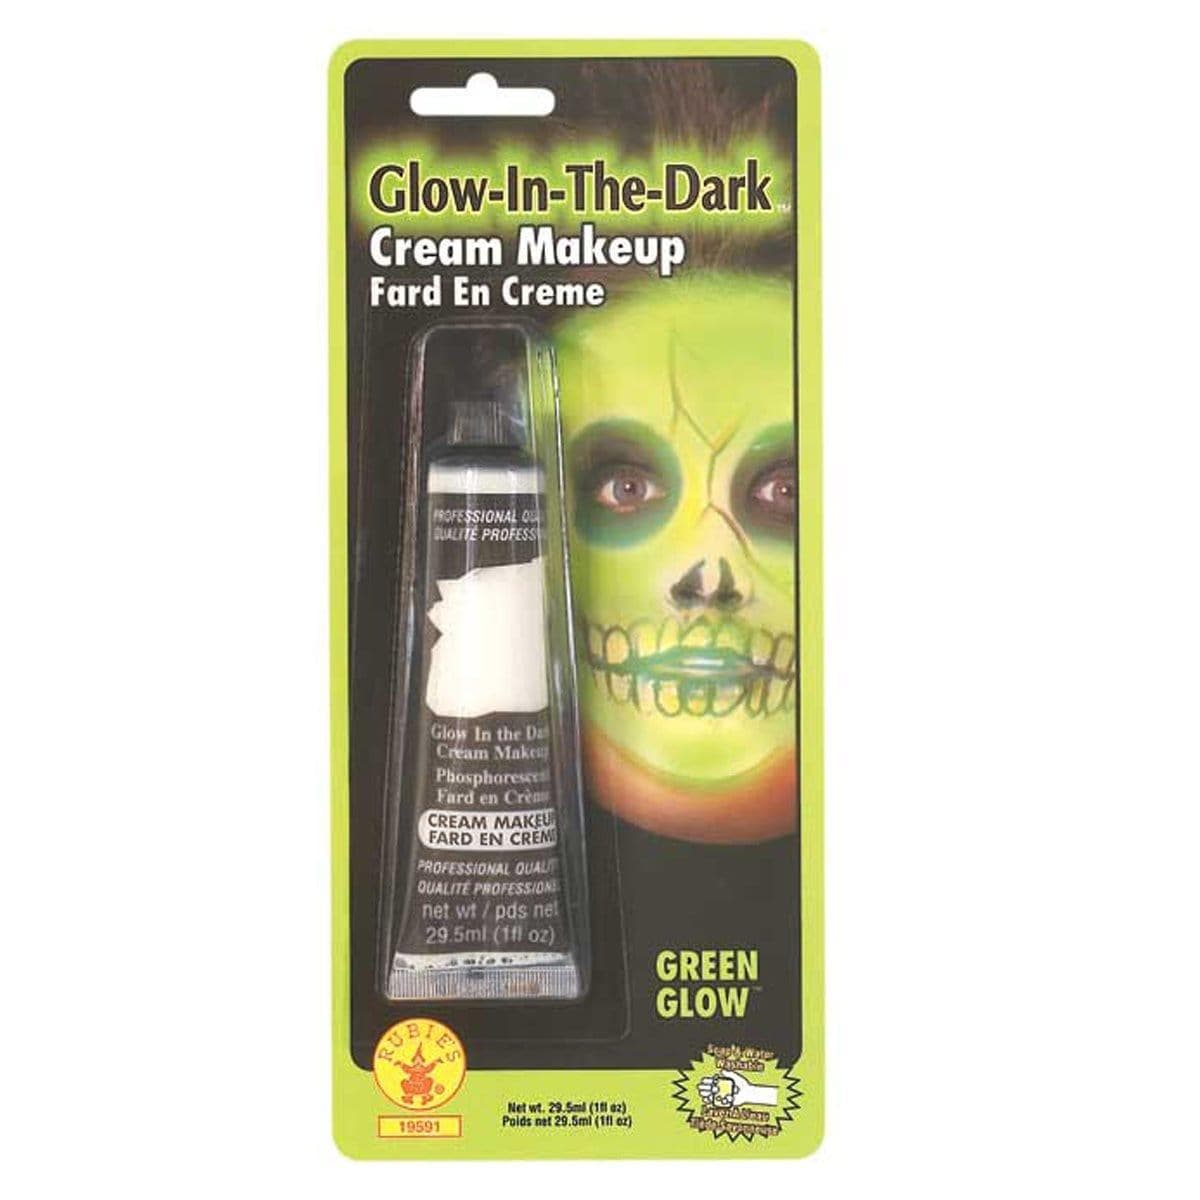 Buy Costume Accessories Glow in the dark cream makeup sold at Party Expert